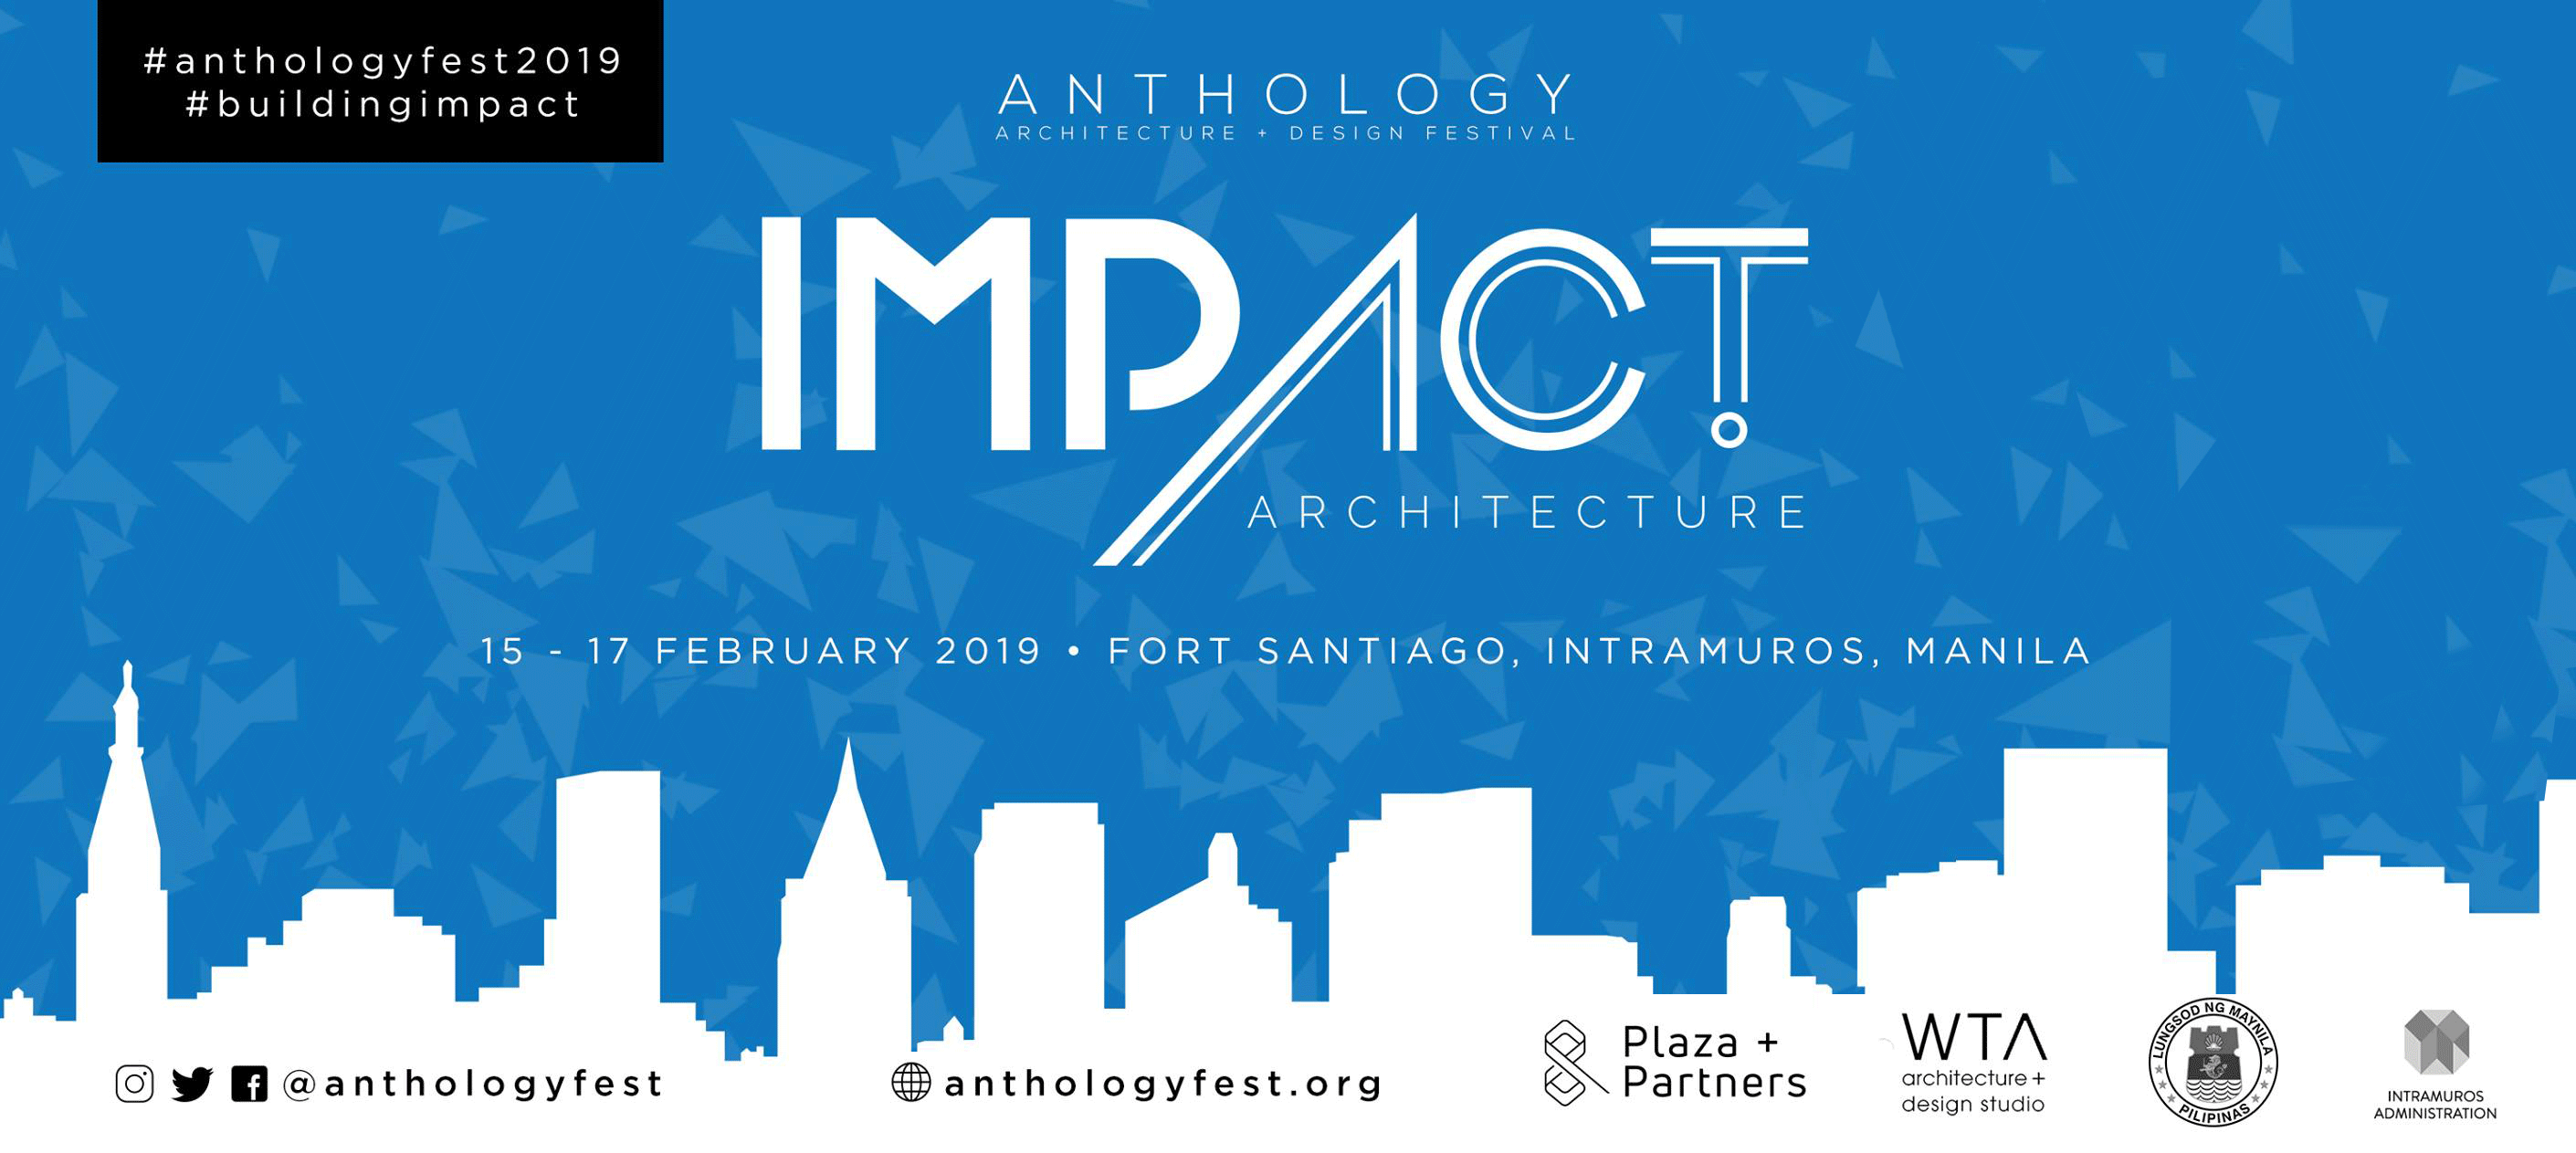 ANTHOLOGY ARCHITECTURE AND DESIGN FESTIVAL is an annual three-day event, hosted and organized by WTA Architecture and Design Studio, that showcases architecture and design within the Philippines and the Southeast Asian region. The festival serves as a platform to bring together various practitioners and stakeholders to increase awareness about the relevance of architecture and design in our urban societies.